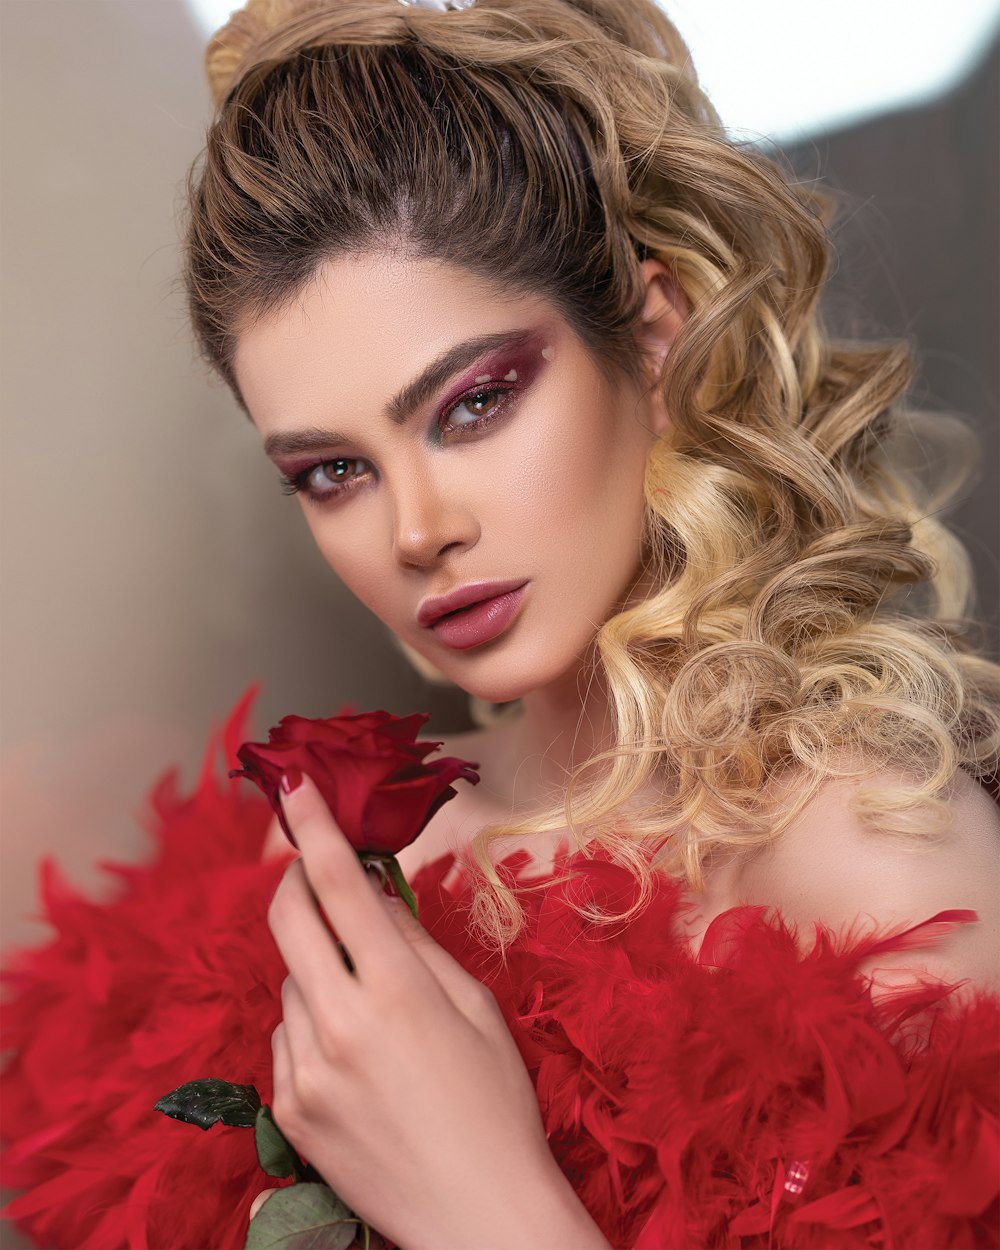 close-up photography of woman holding red rose flower